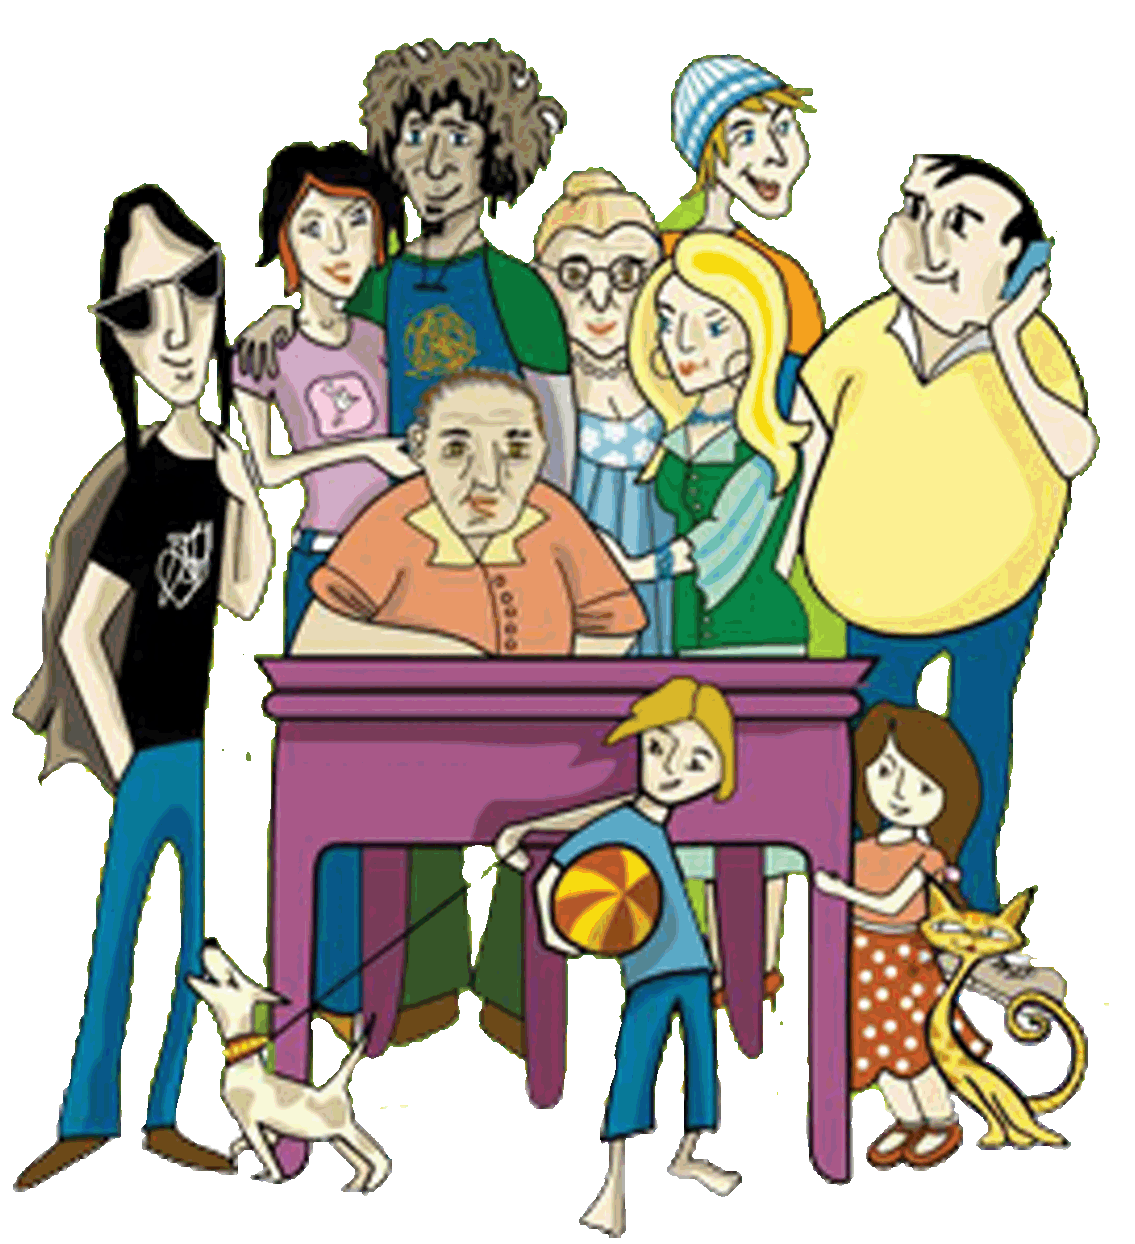 Learning clipart accountable talk. Collection of free distraining